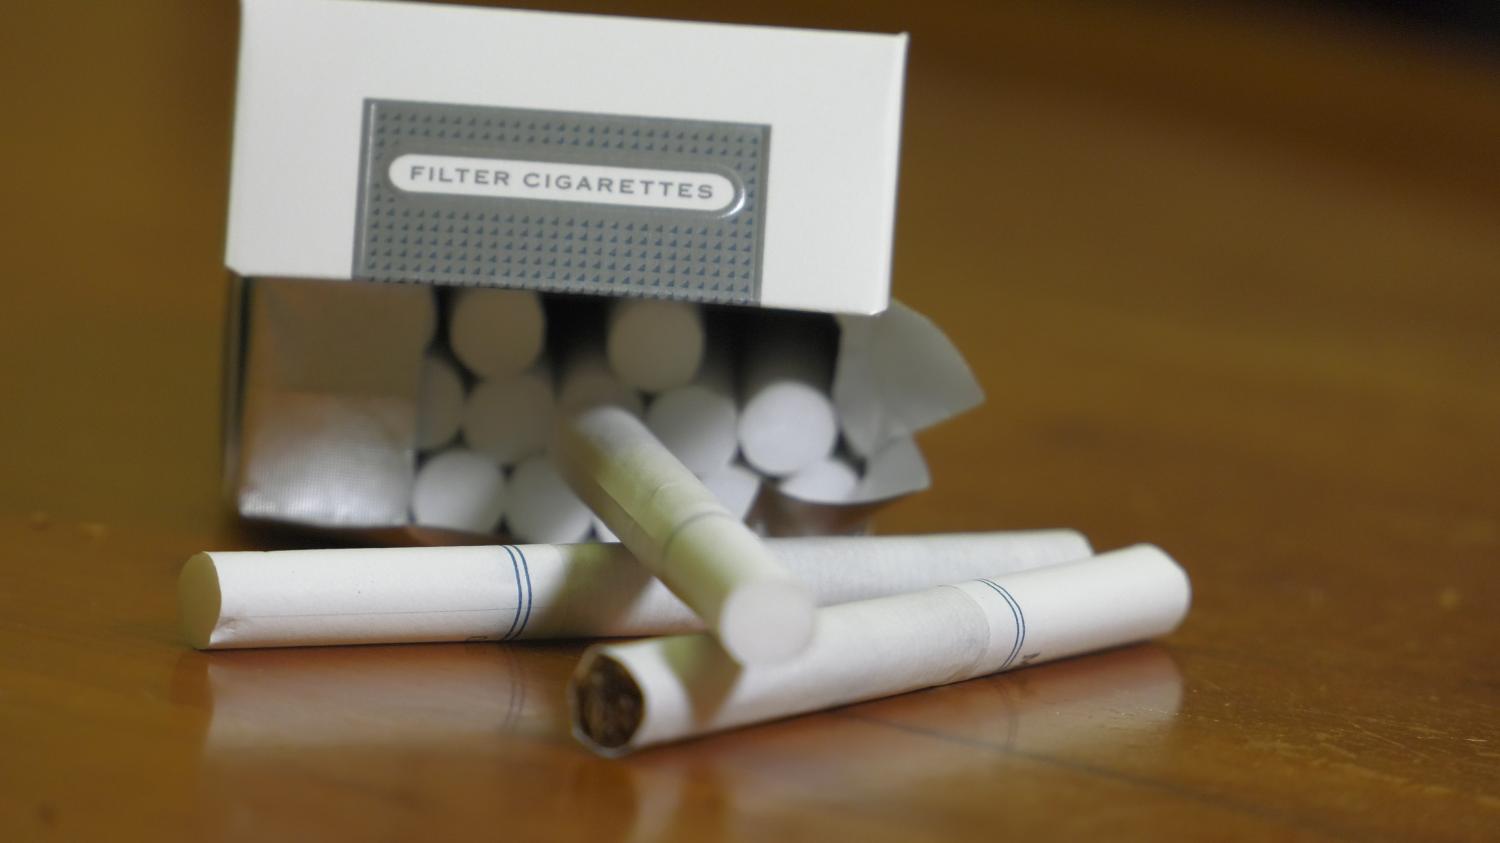 Doctors urge FDA to tighten regulations on 'filtered' cigare